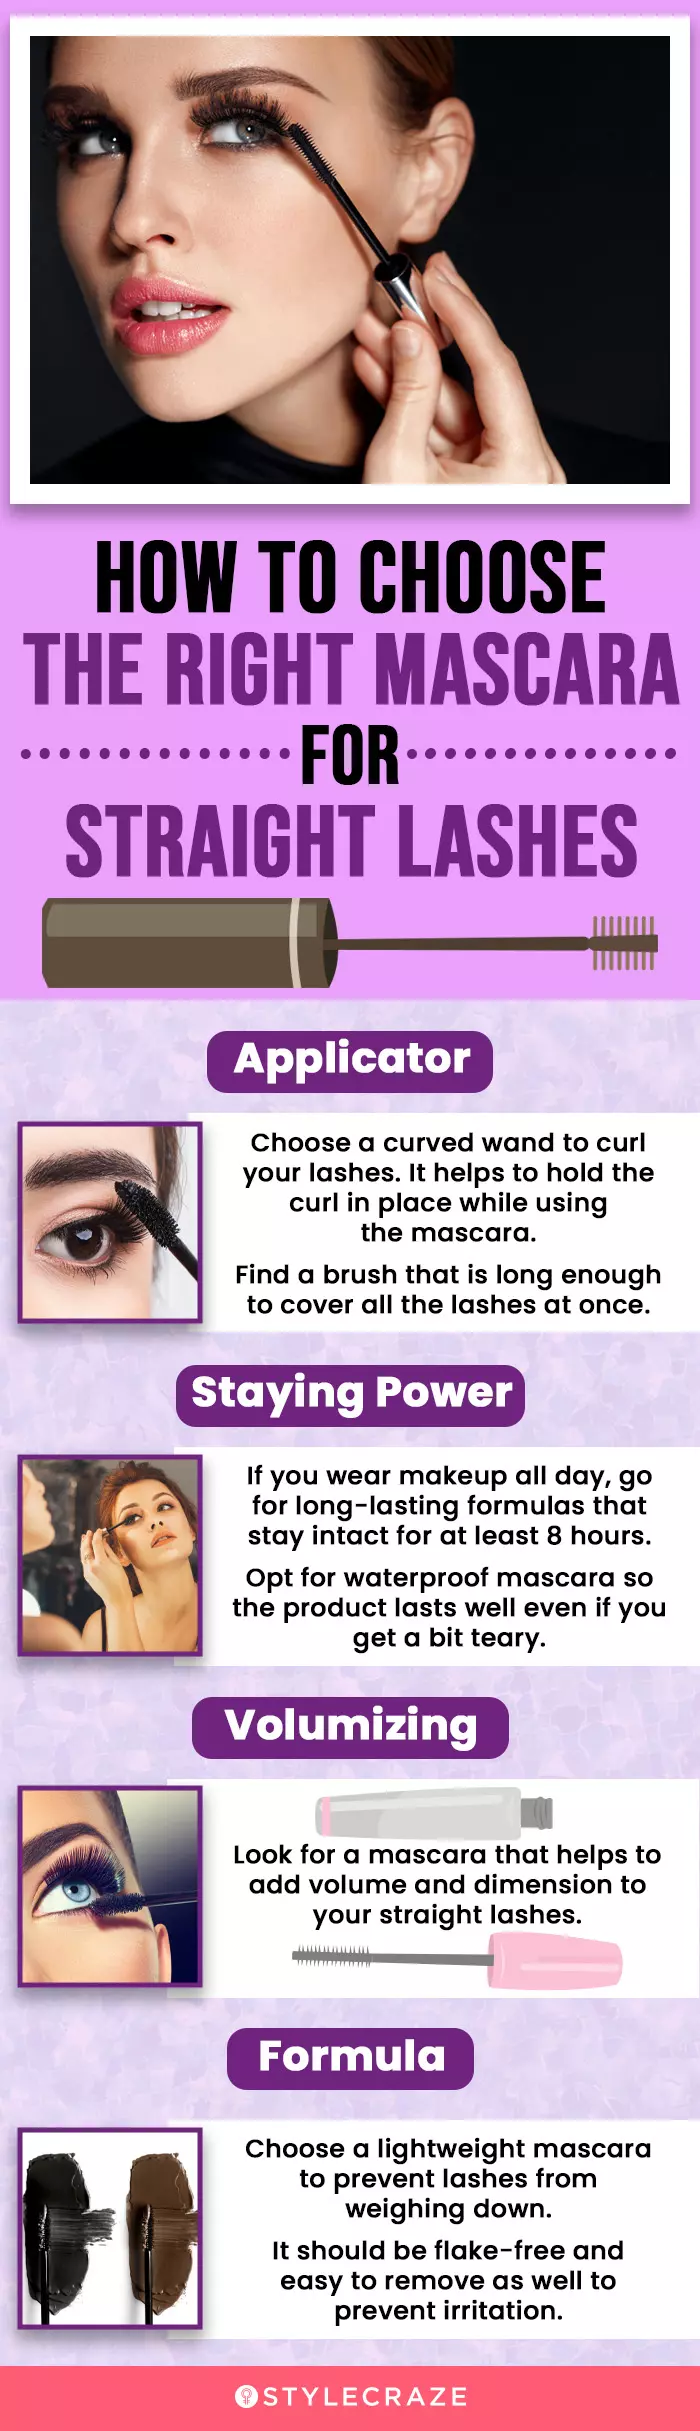 How To Choose The Right Mascara For Straight Lashes (infographic)